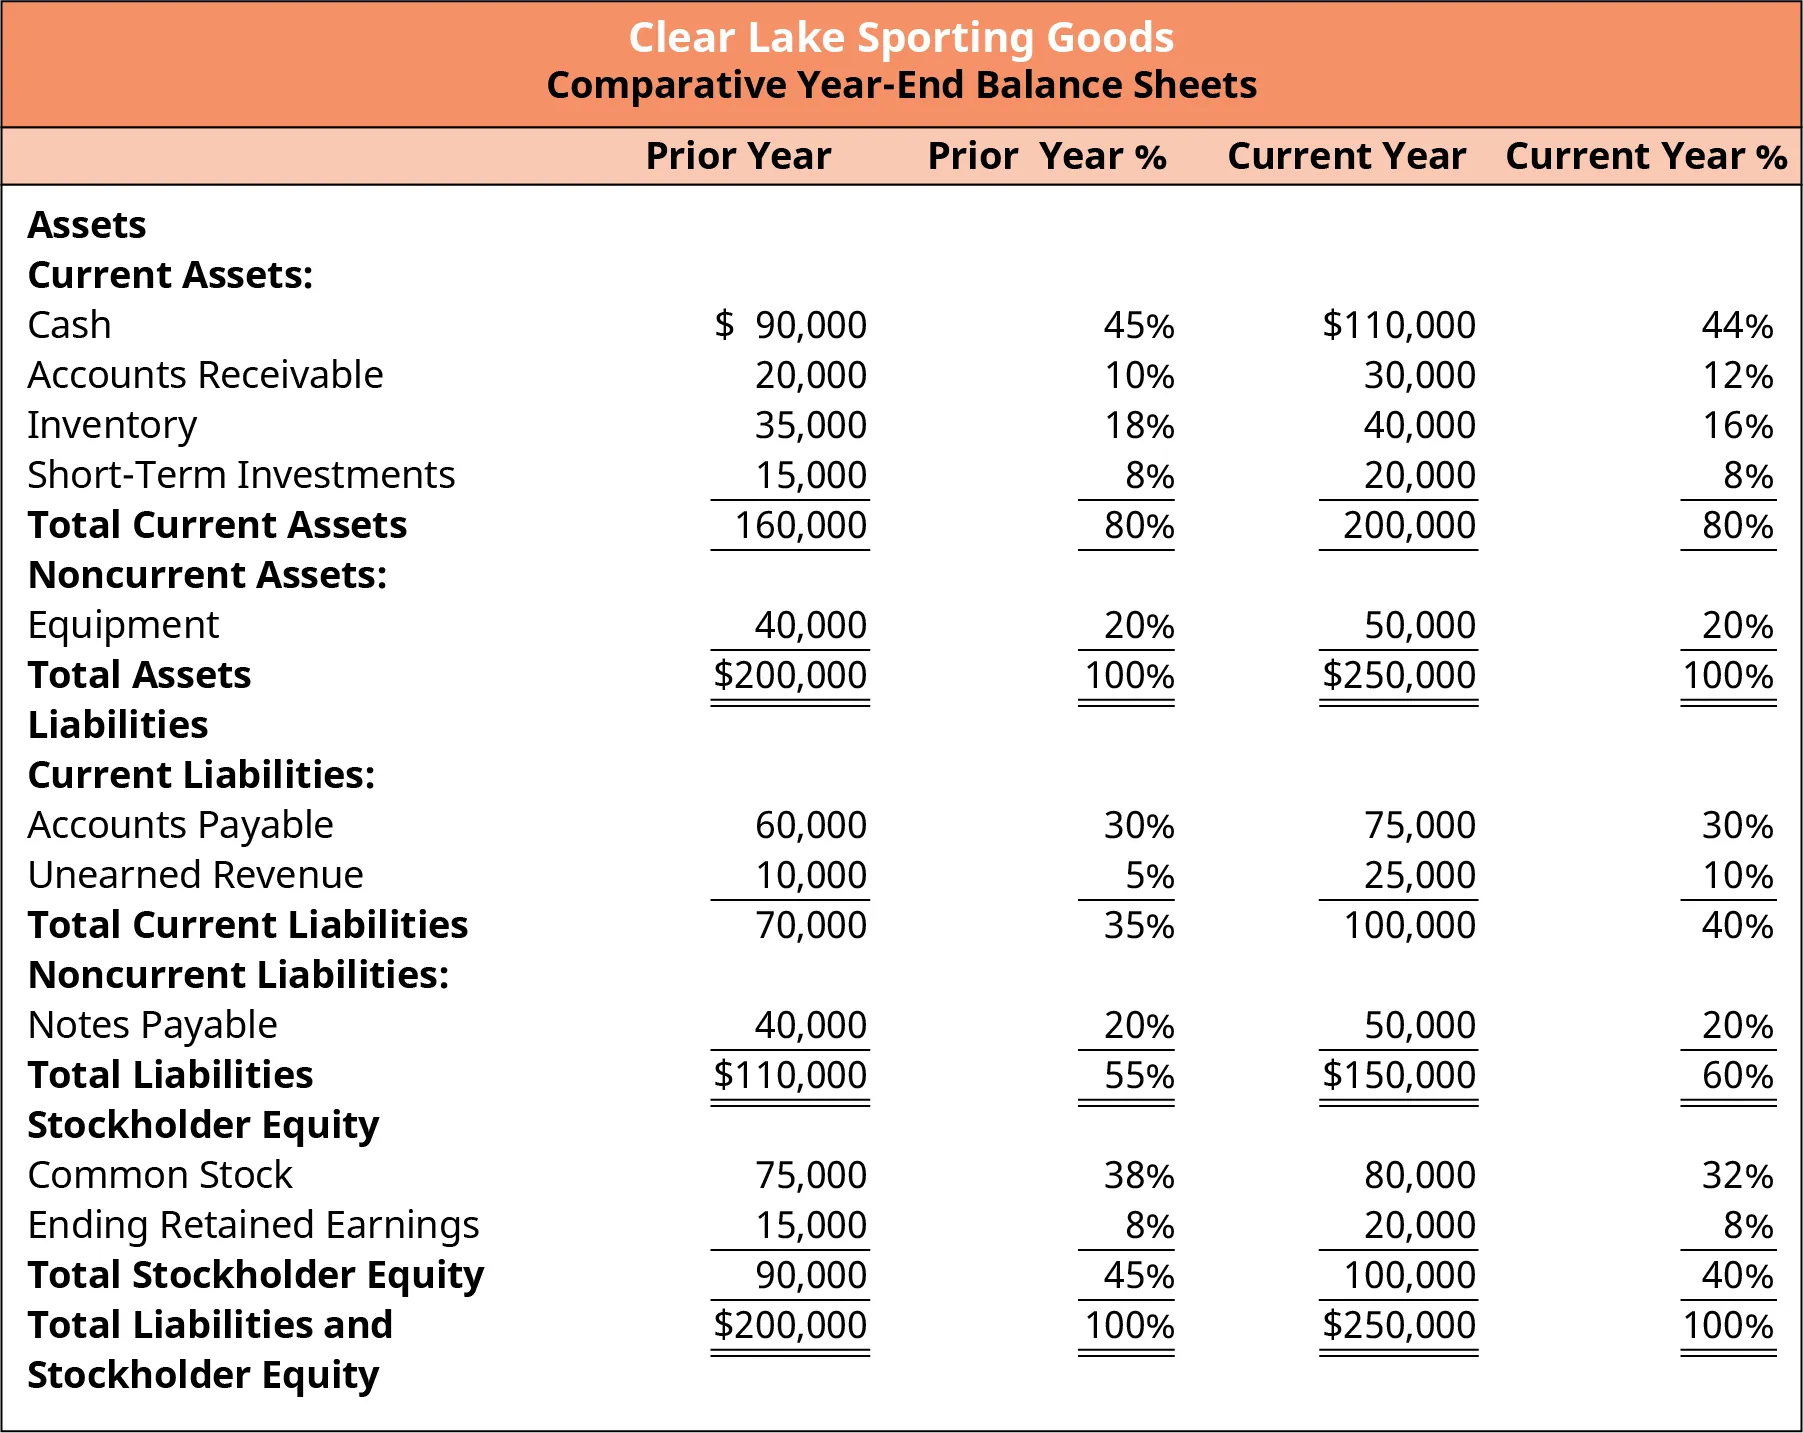 A comparative year-end balance sheet for Clear Lake Sporting Goods shows assets, liabilities, and stockholder equity for the prior and current year. Each line item is represented as both a dollar figure and a percent of the total assets or liabilities.